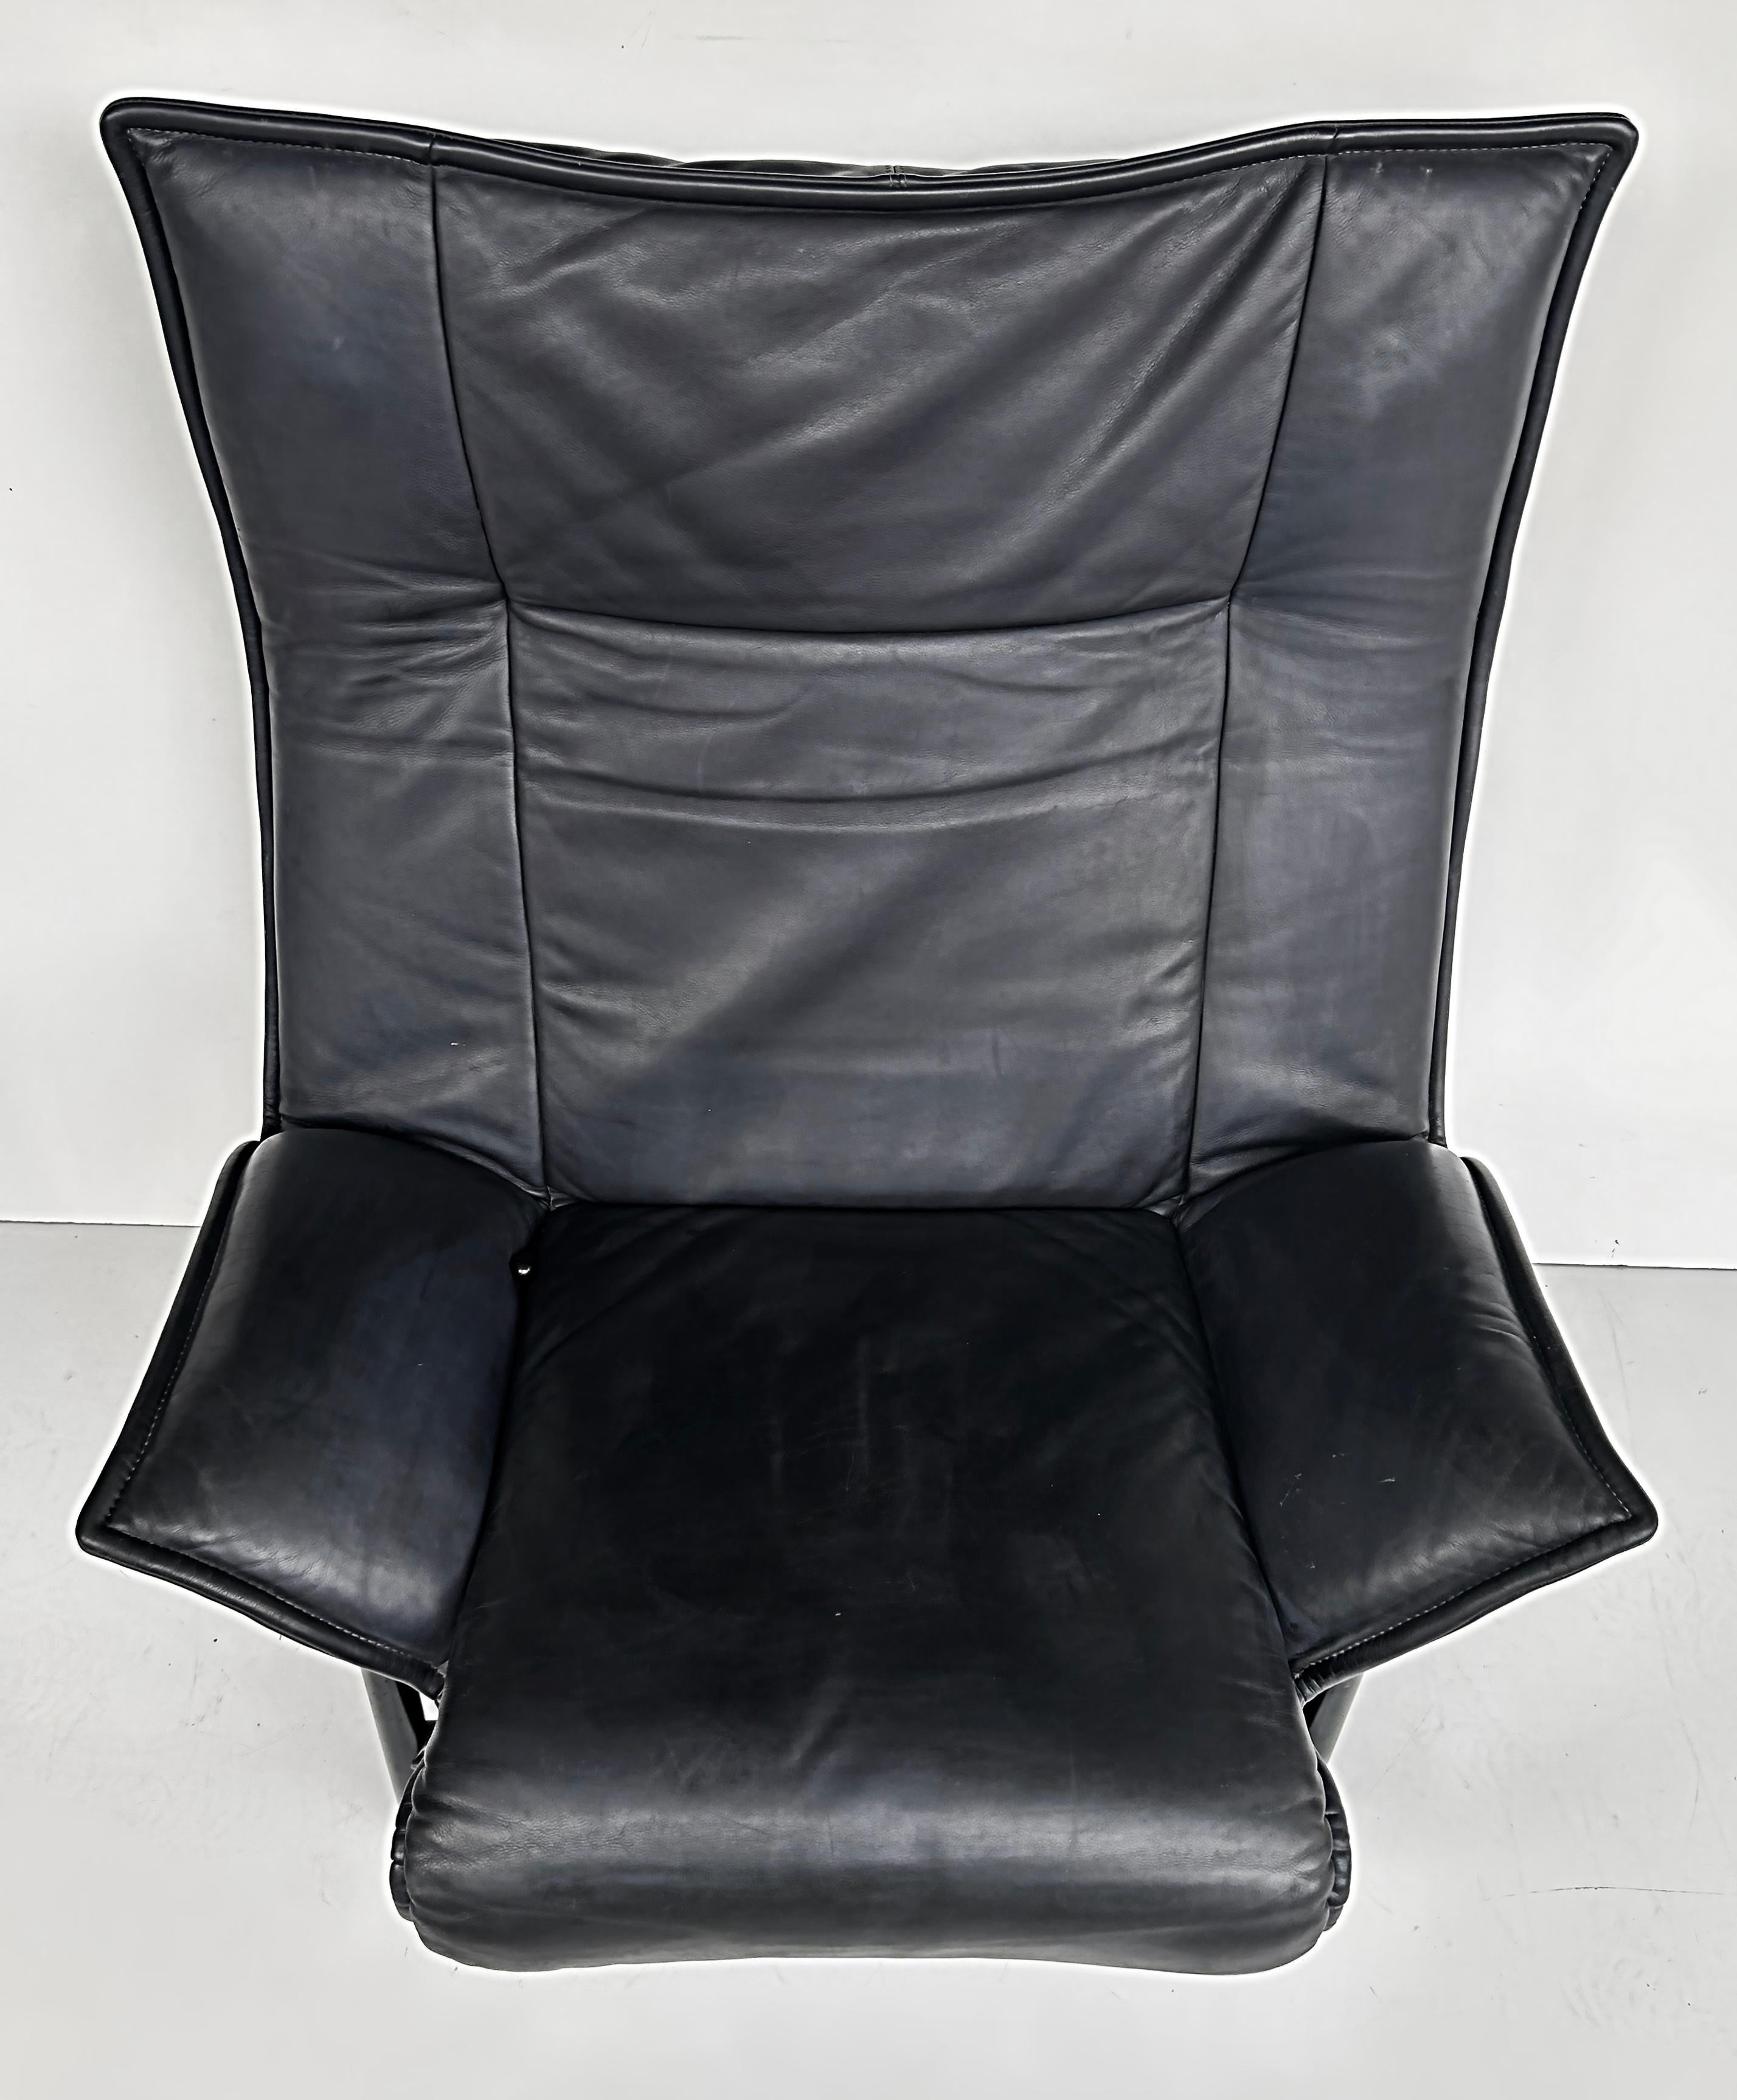 Vico Magistretti Cassina Italy Leather Chaise Lounge Chairs, 